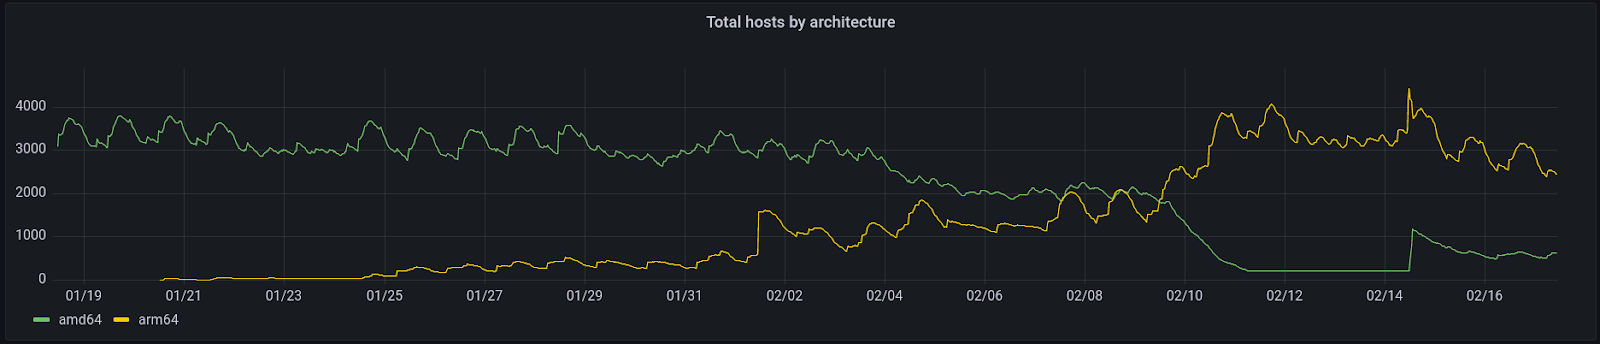 Number of hosts by architecture from 19th January - 16th February 2022